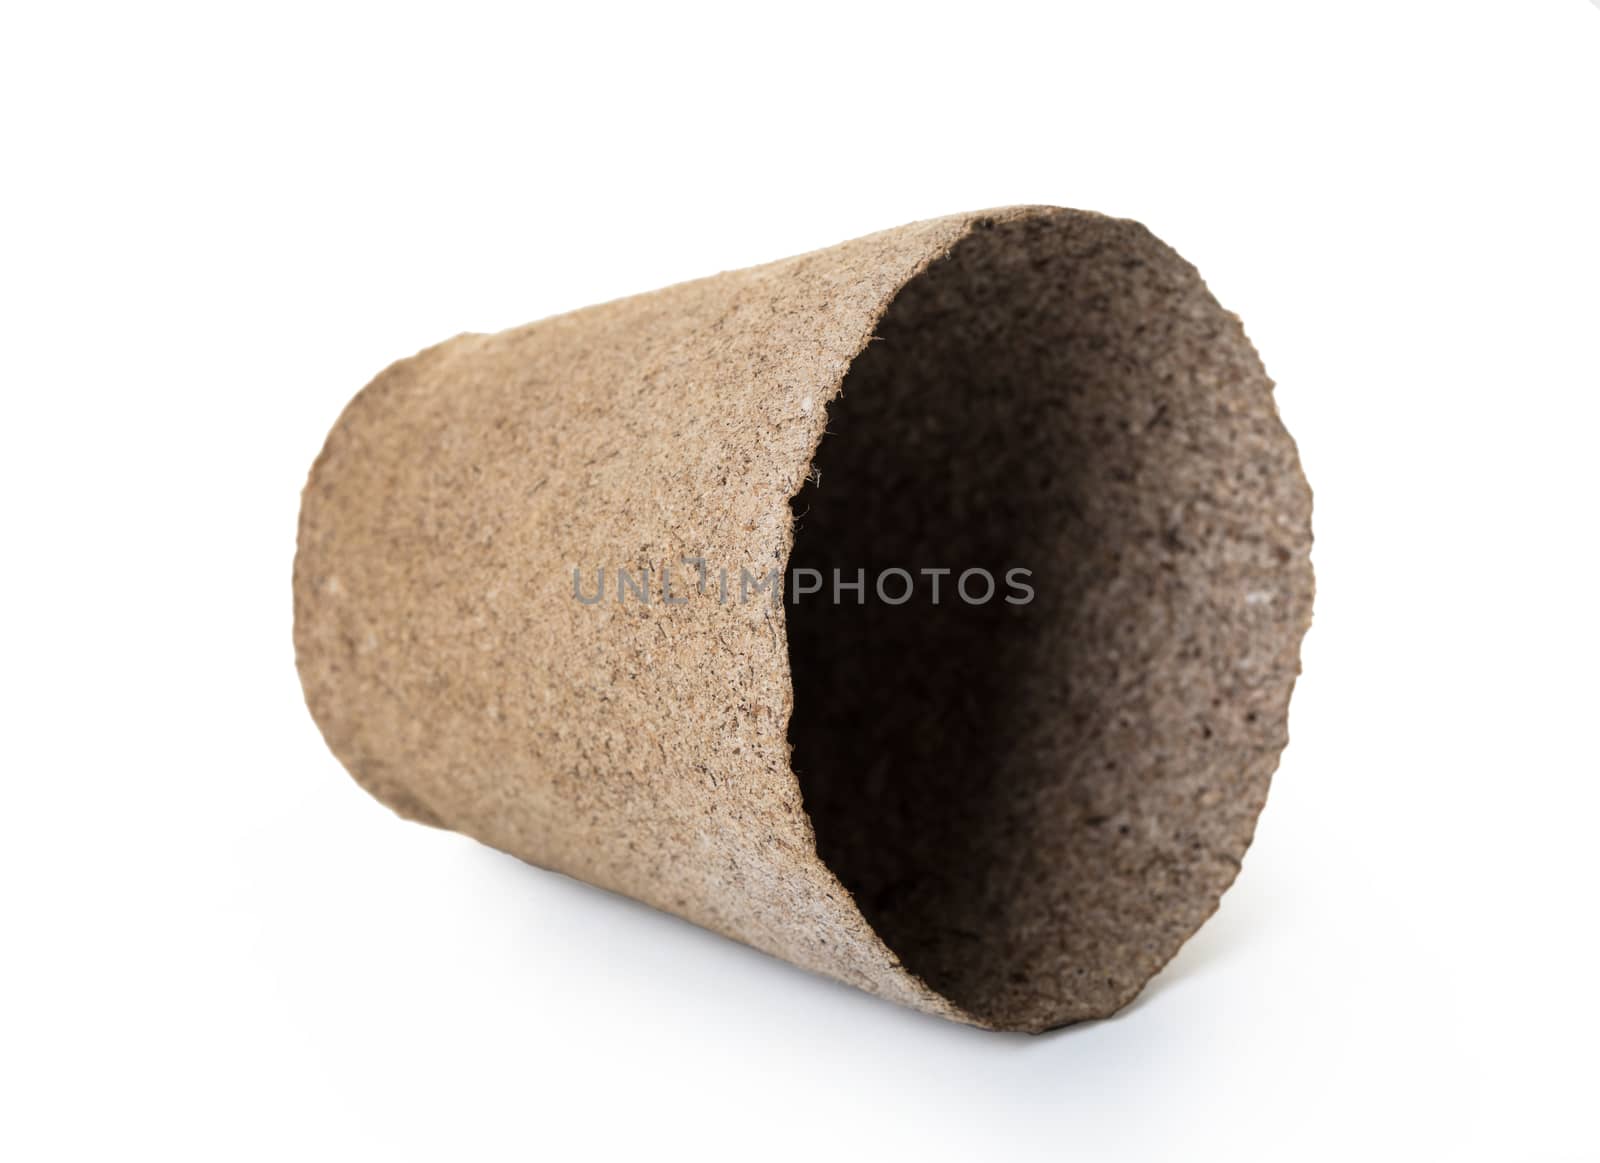 new flower pot on white isolated background